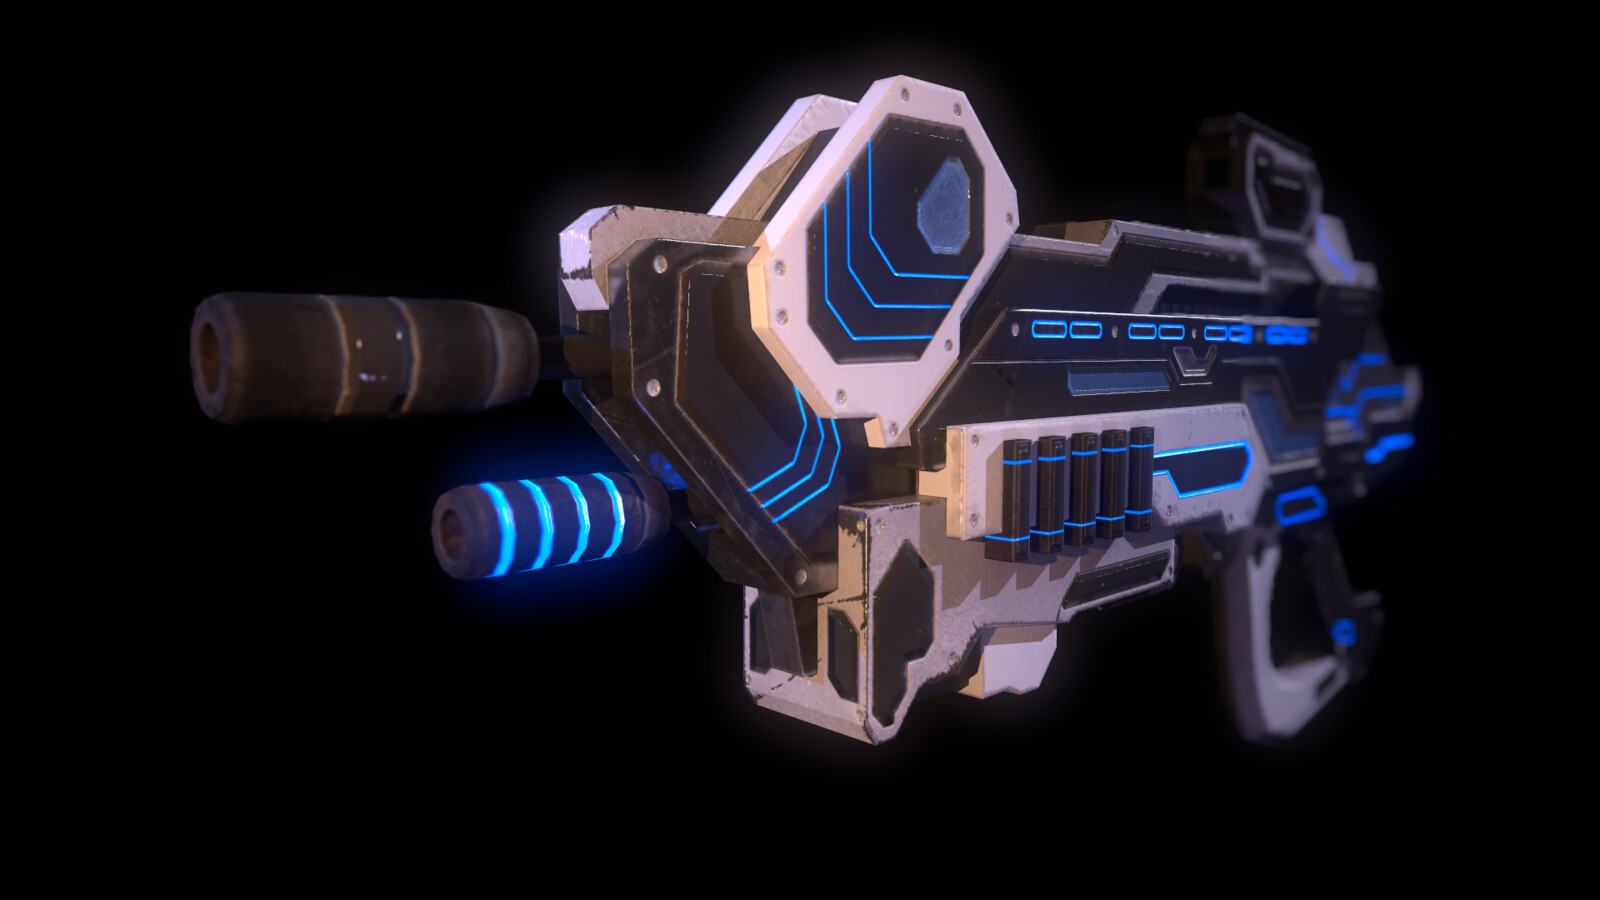 It's another gun, this one is low poly! 2011